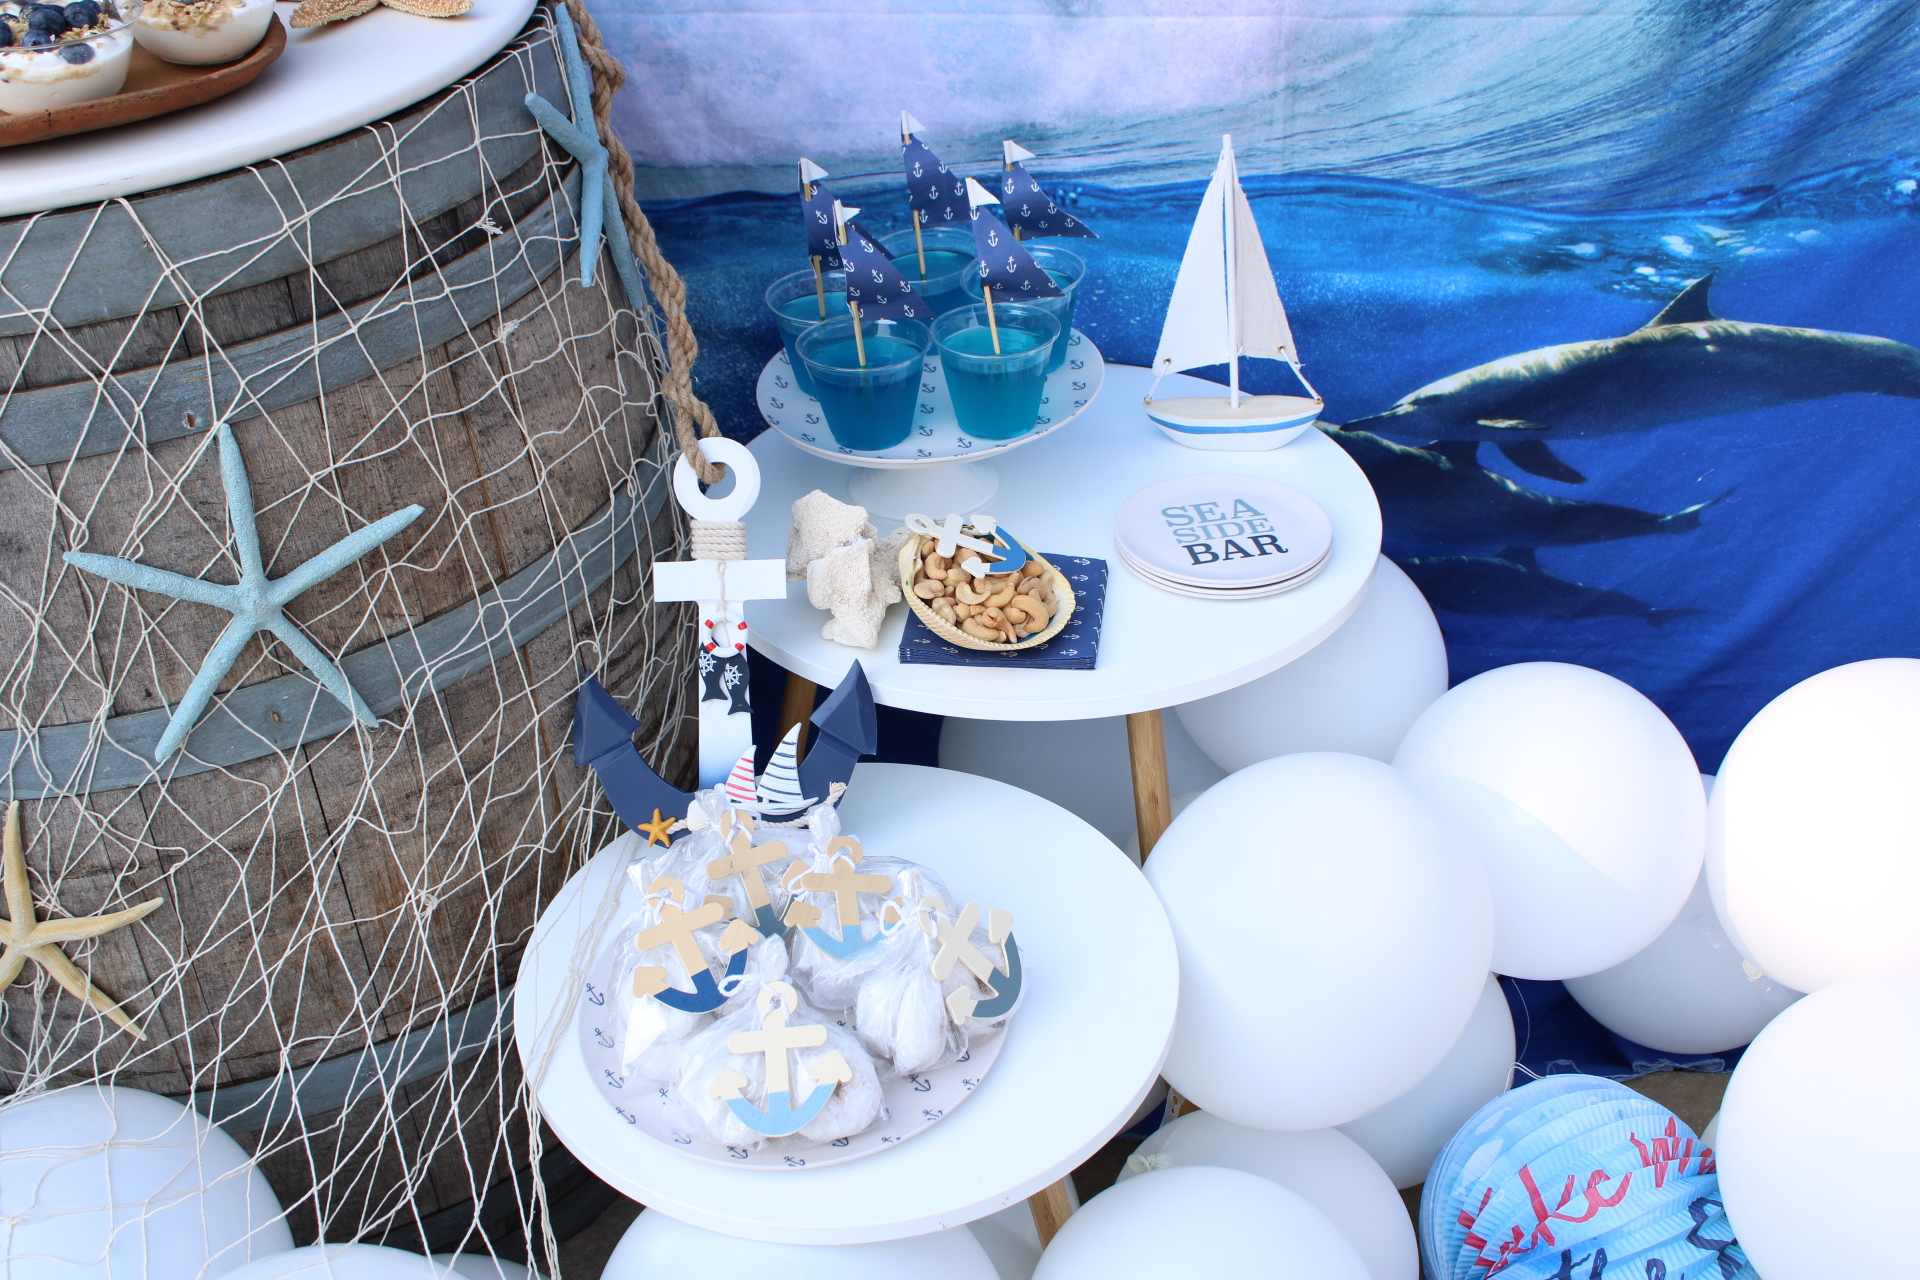  Ahoy It's a Boy Baby Shower Backdrop Nautical Navy Blue Sea  White Cloud Beach Sweet Newborn Welcome Seagull Ship Anchor Coral Seashell  for Boy Photography Background Party Decorations 7x5ft 